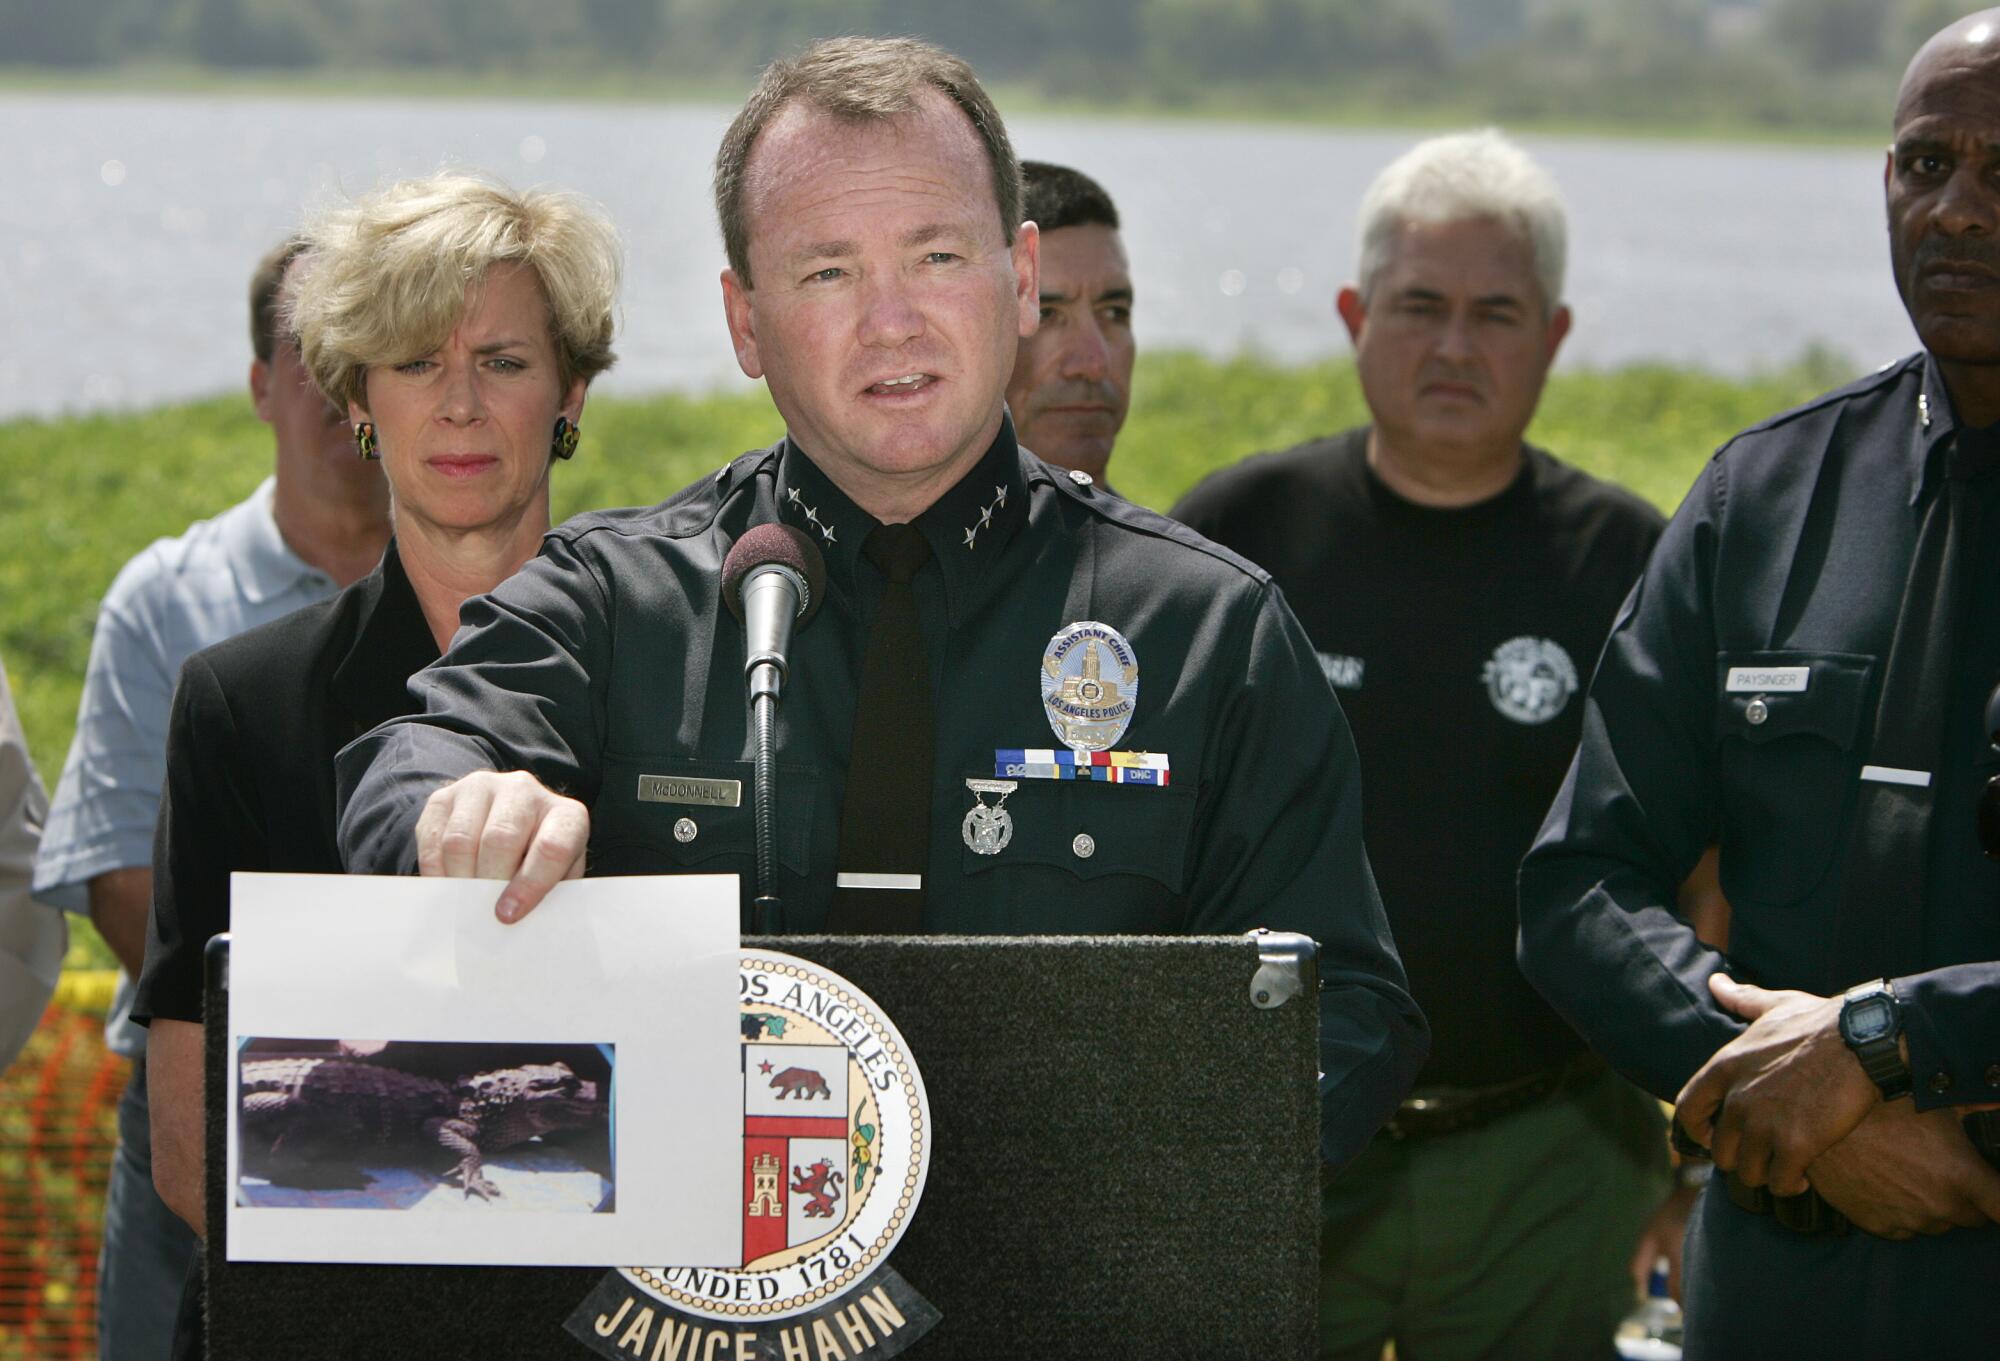 A police officer at a news conference holds up a photo of an alligator 